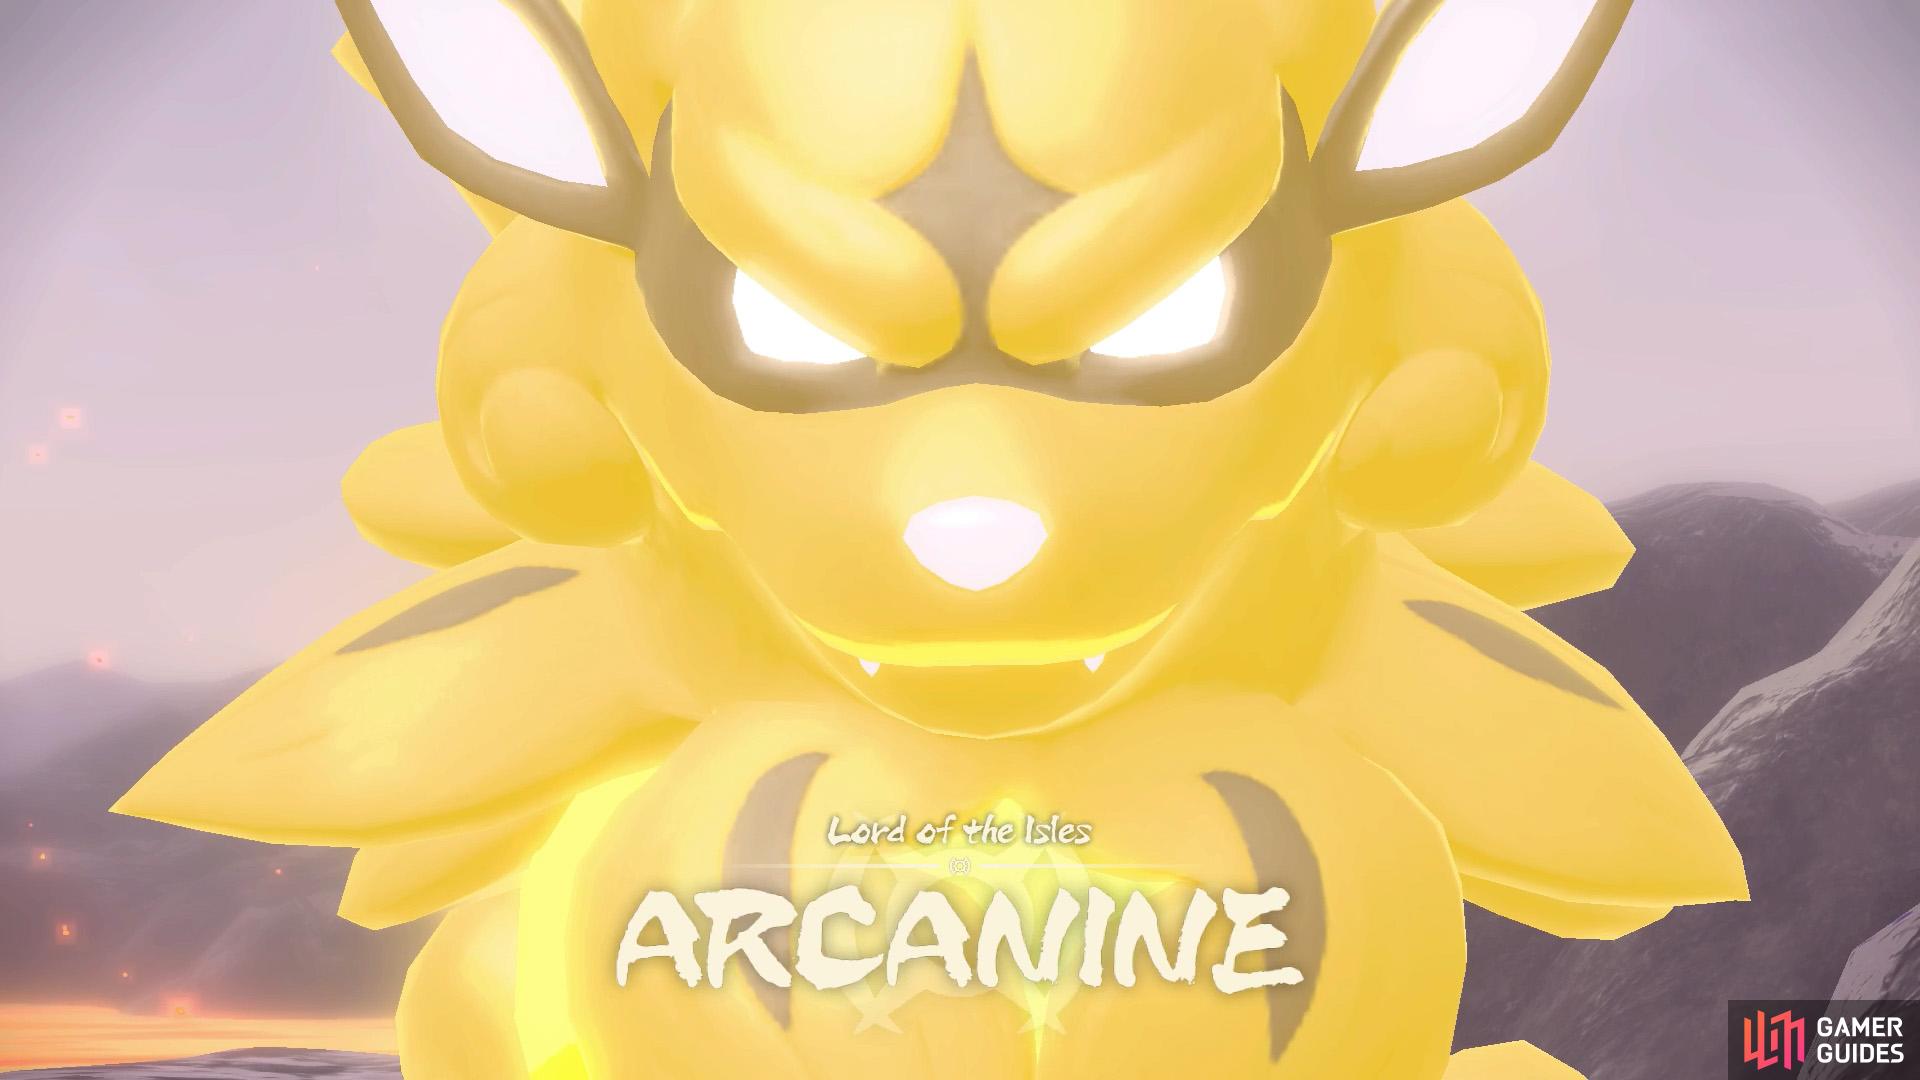 Arcanine: Lord of the Isles.